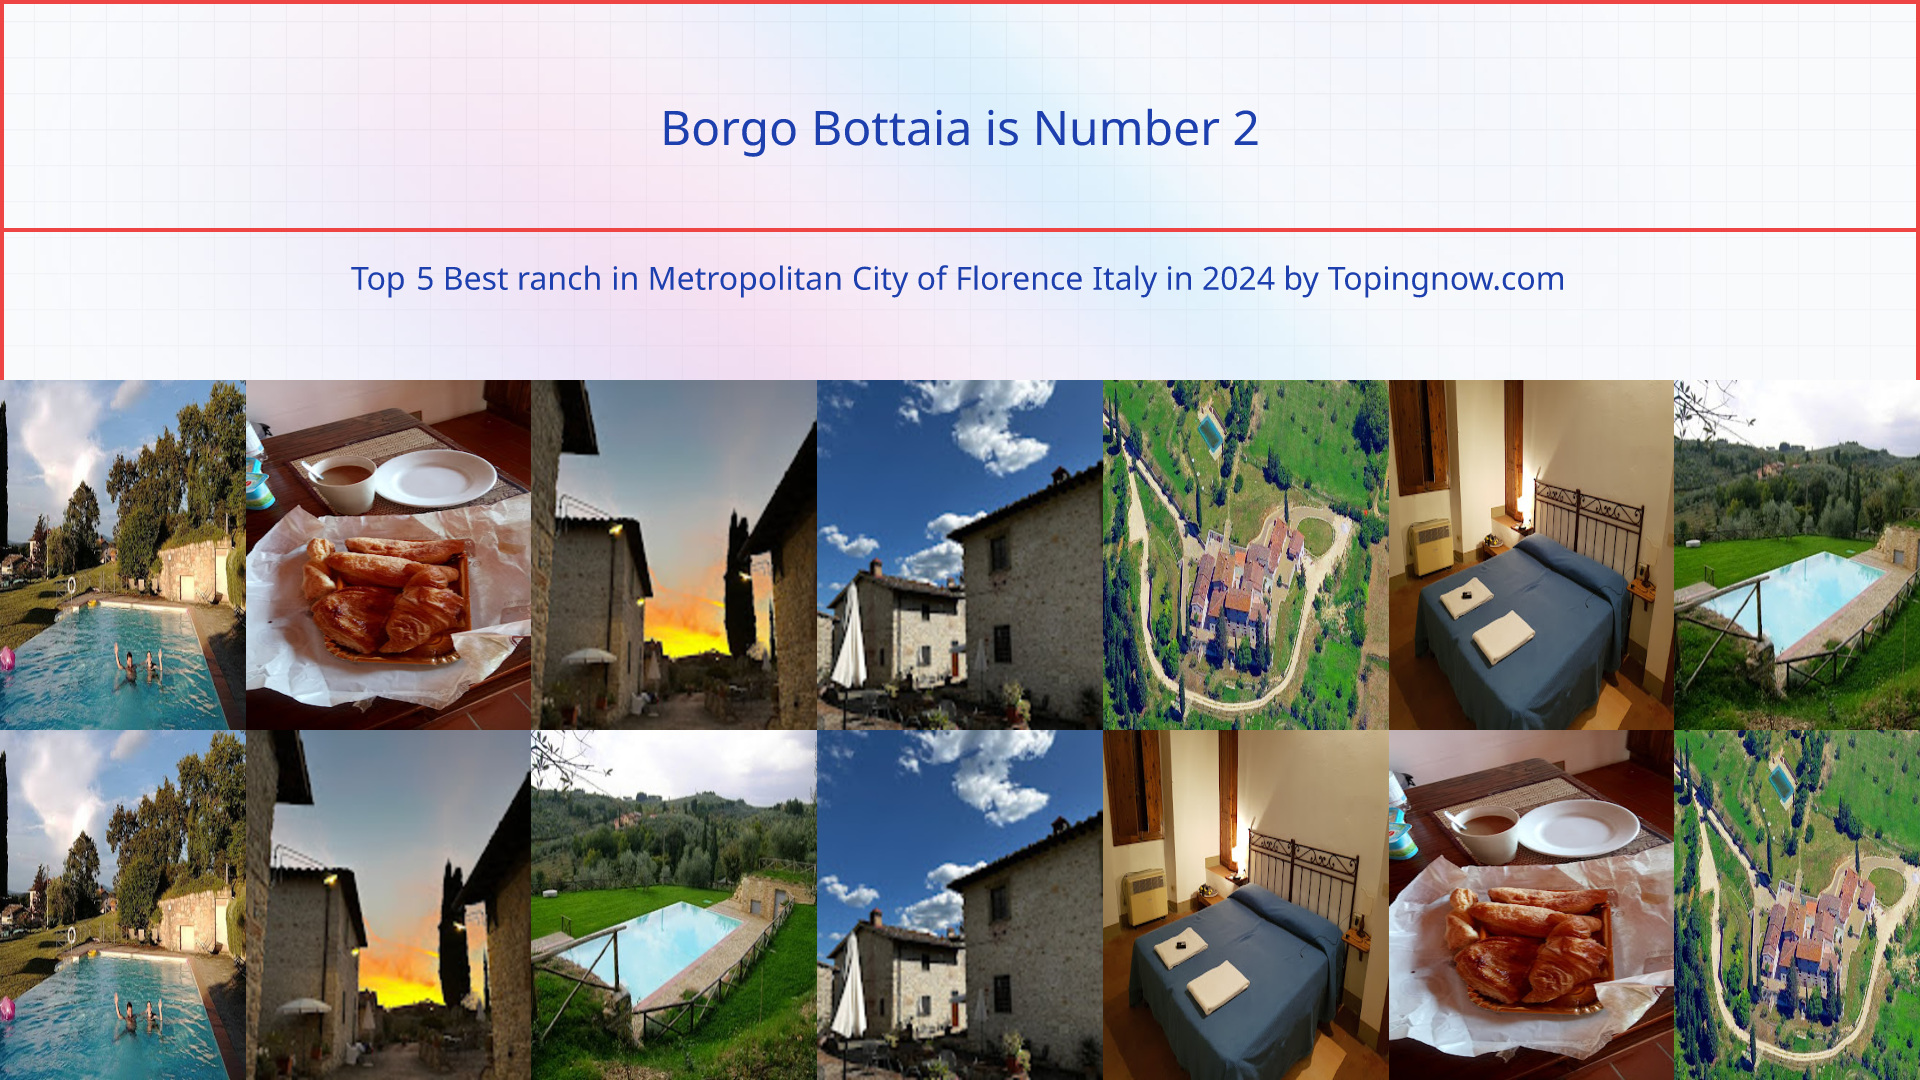 Borgo Bottaia: Top 5 Best ranch in Metropolitan City of Florence Italy in 2024